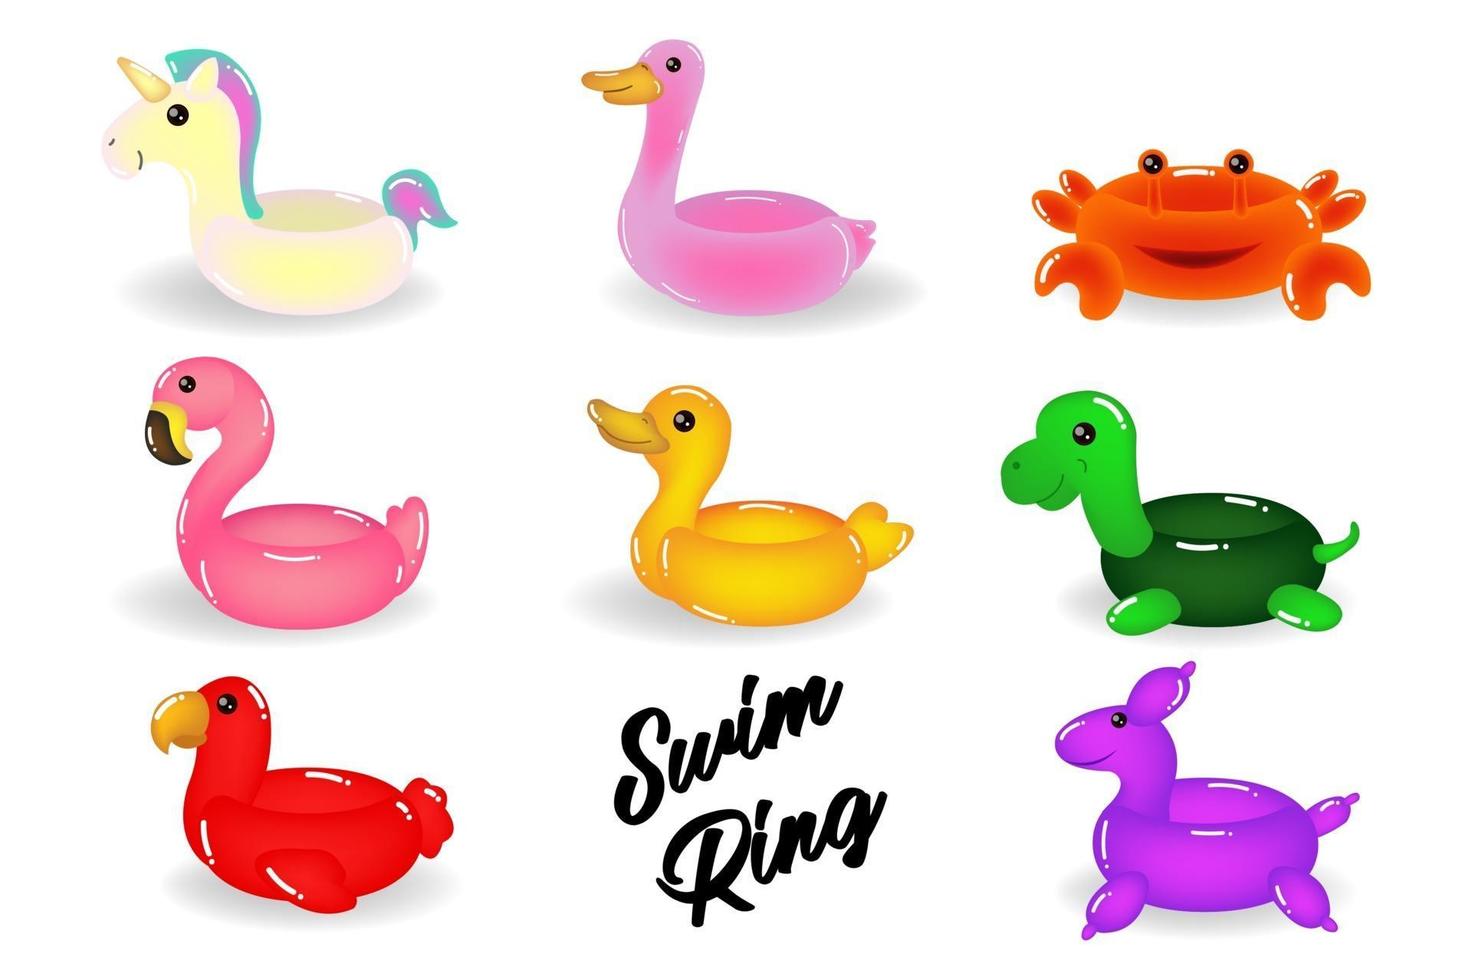 Inflatable swimming ring set. Cute water toys to keep afloat when kids are learning to swim. Vector flat style cartoon inflatable items illustration isolated